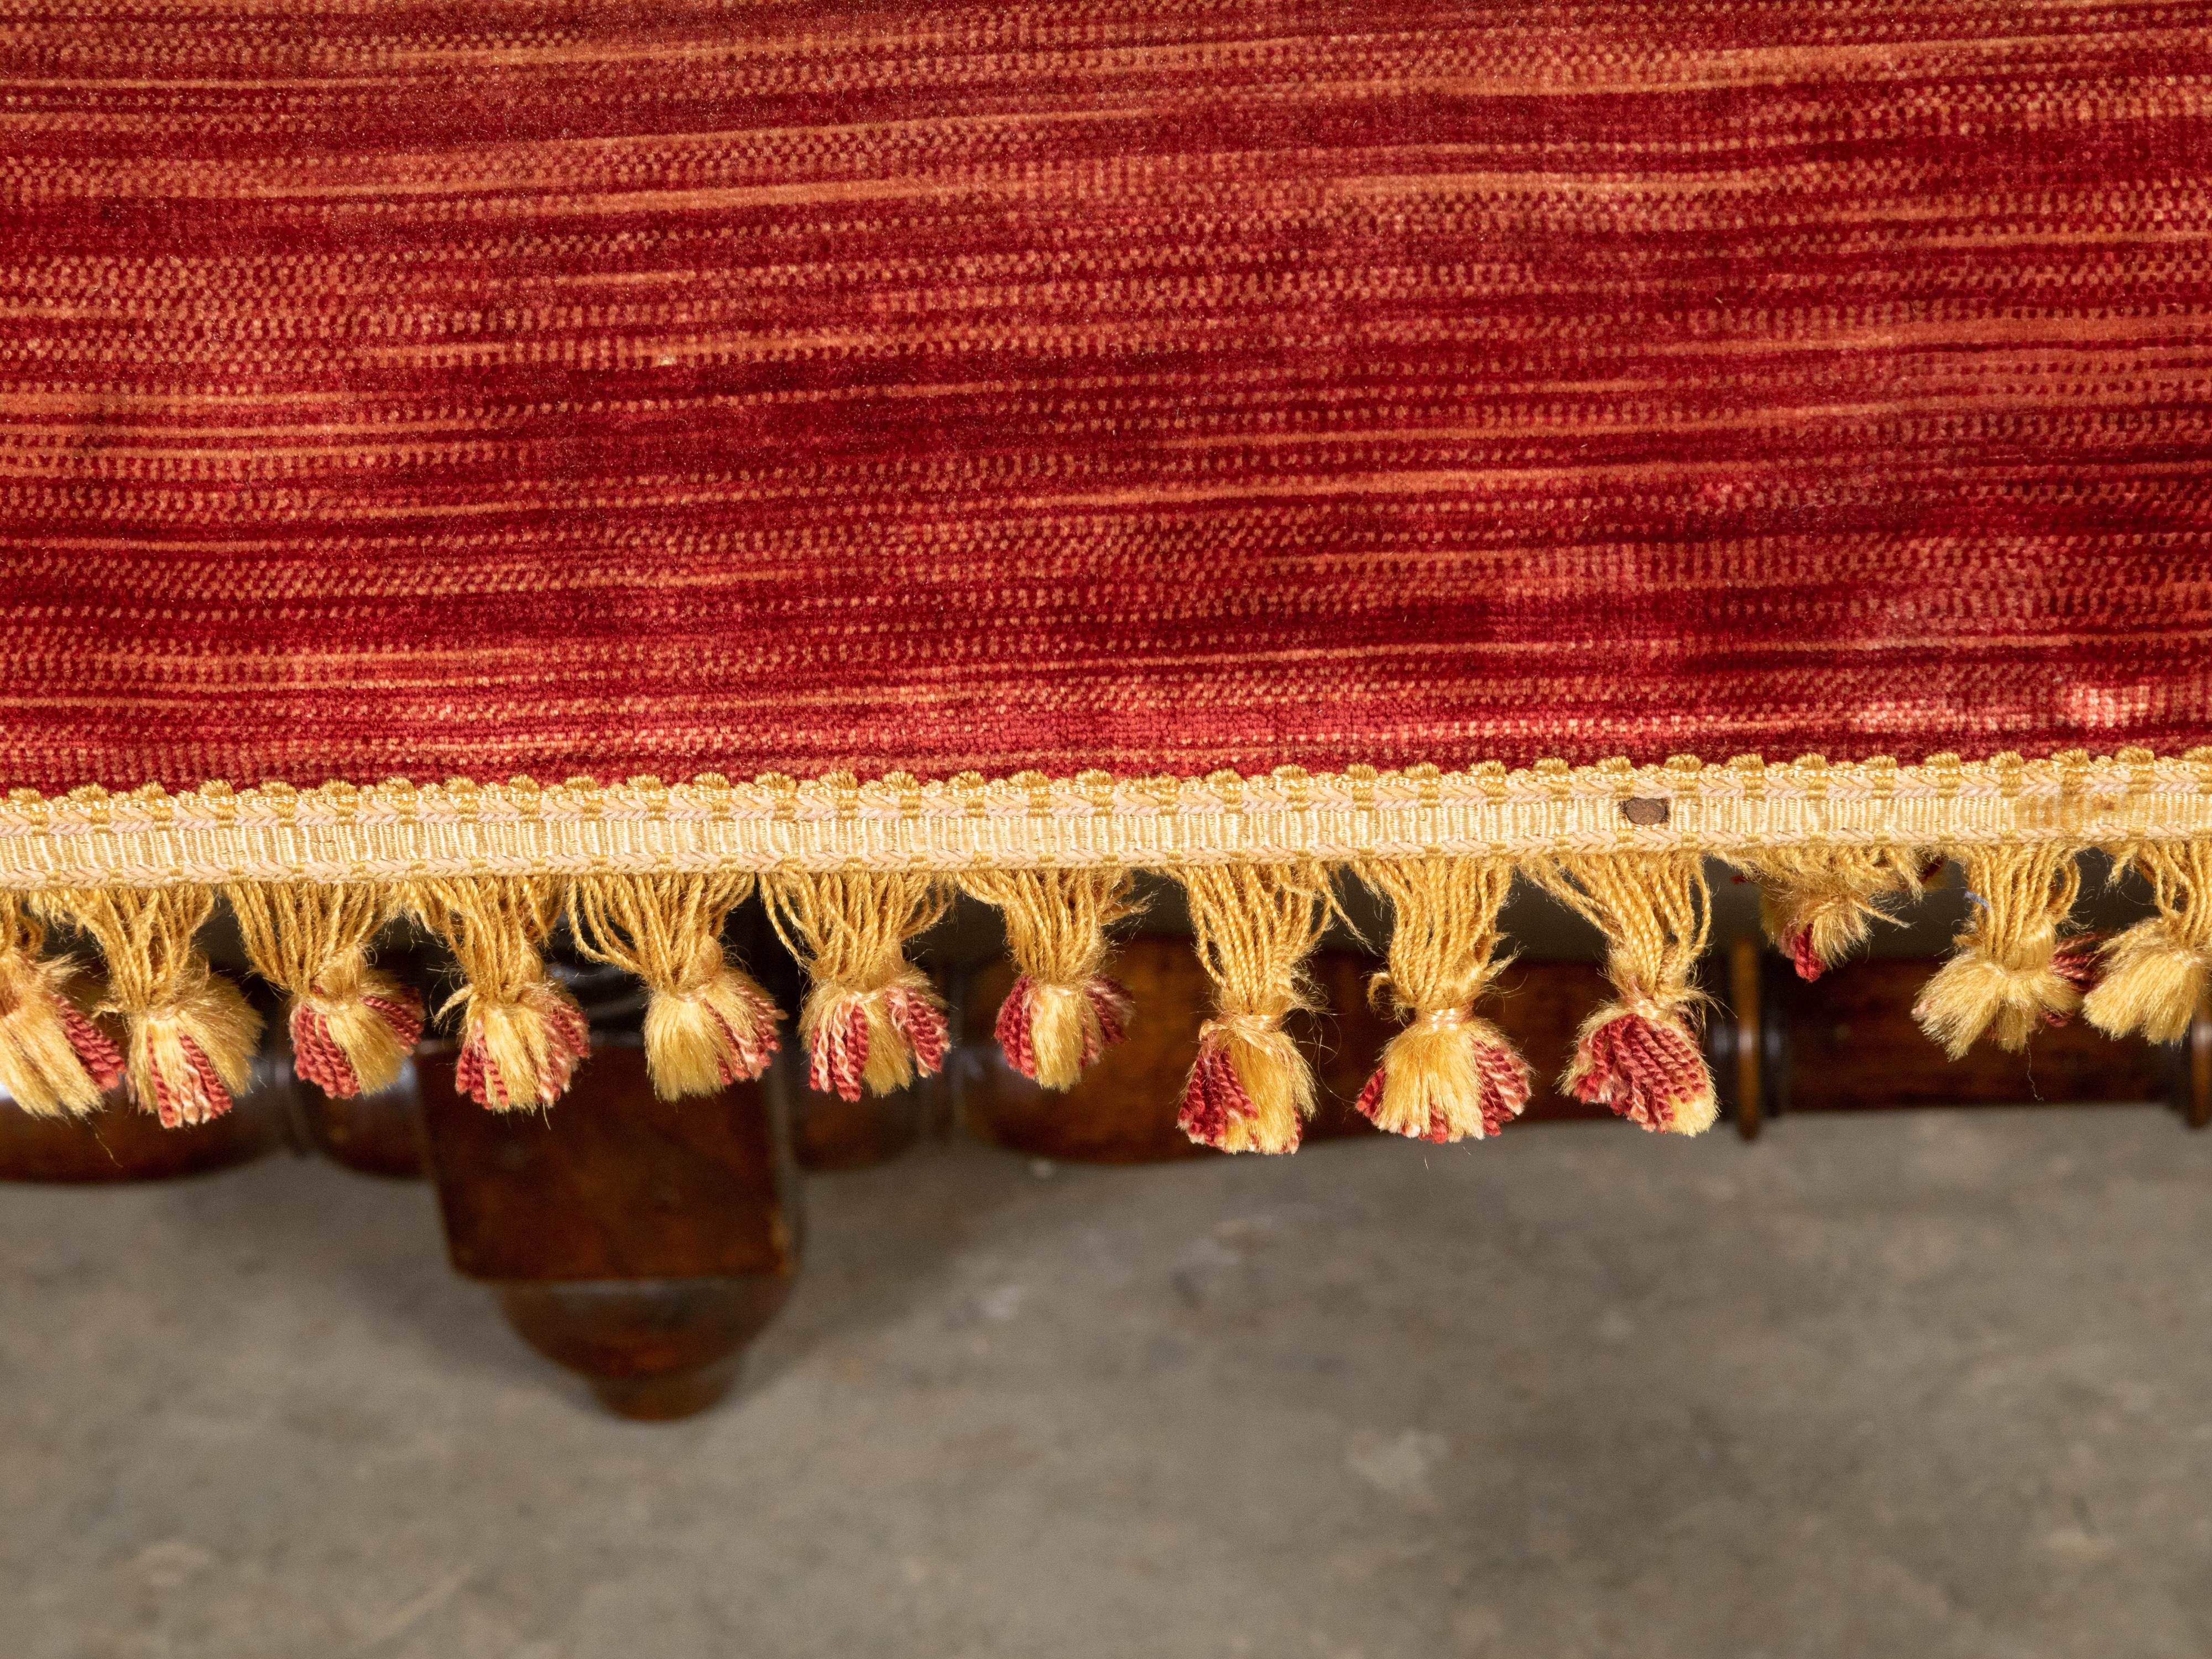 Italian 1820s Walnut Bench with Red Fabric, Turned Legs and Stretchers For Sale 4